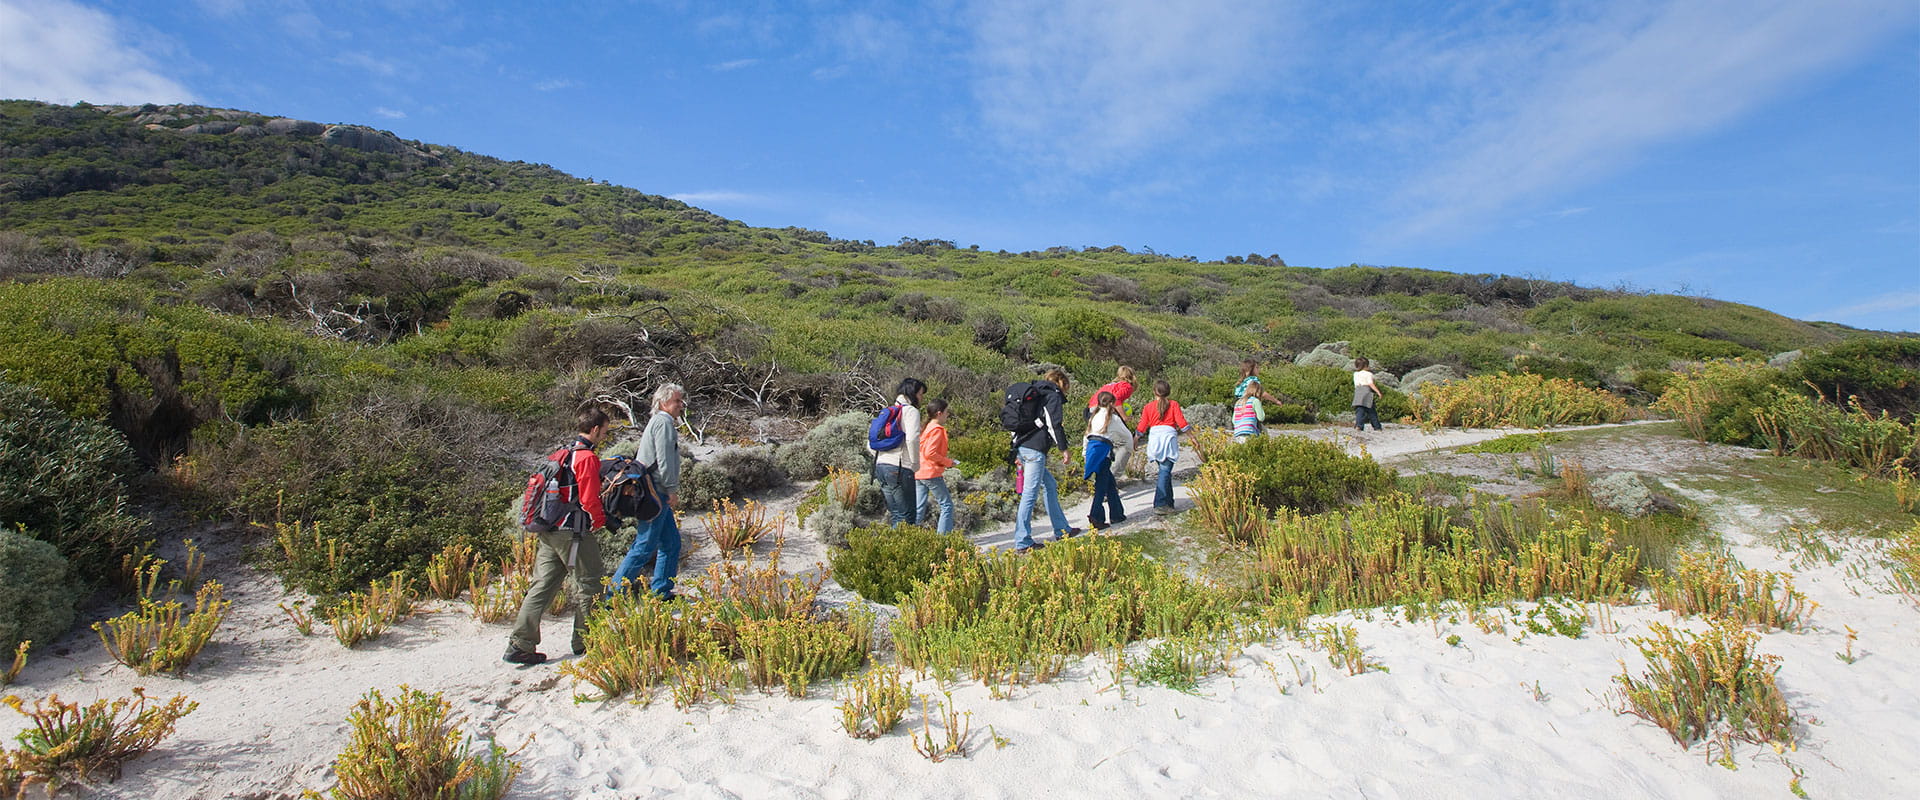 A group of people walking along a sandy path between vegetation.